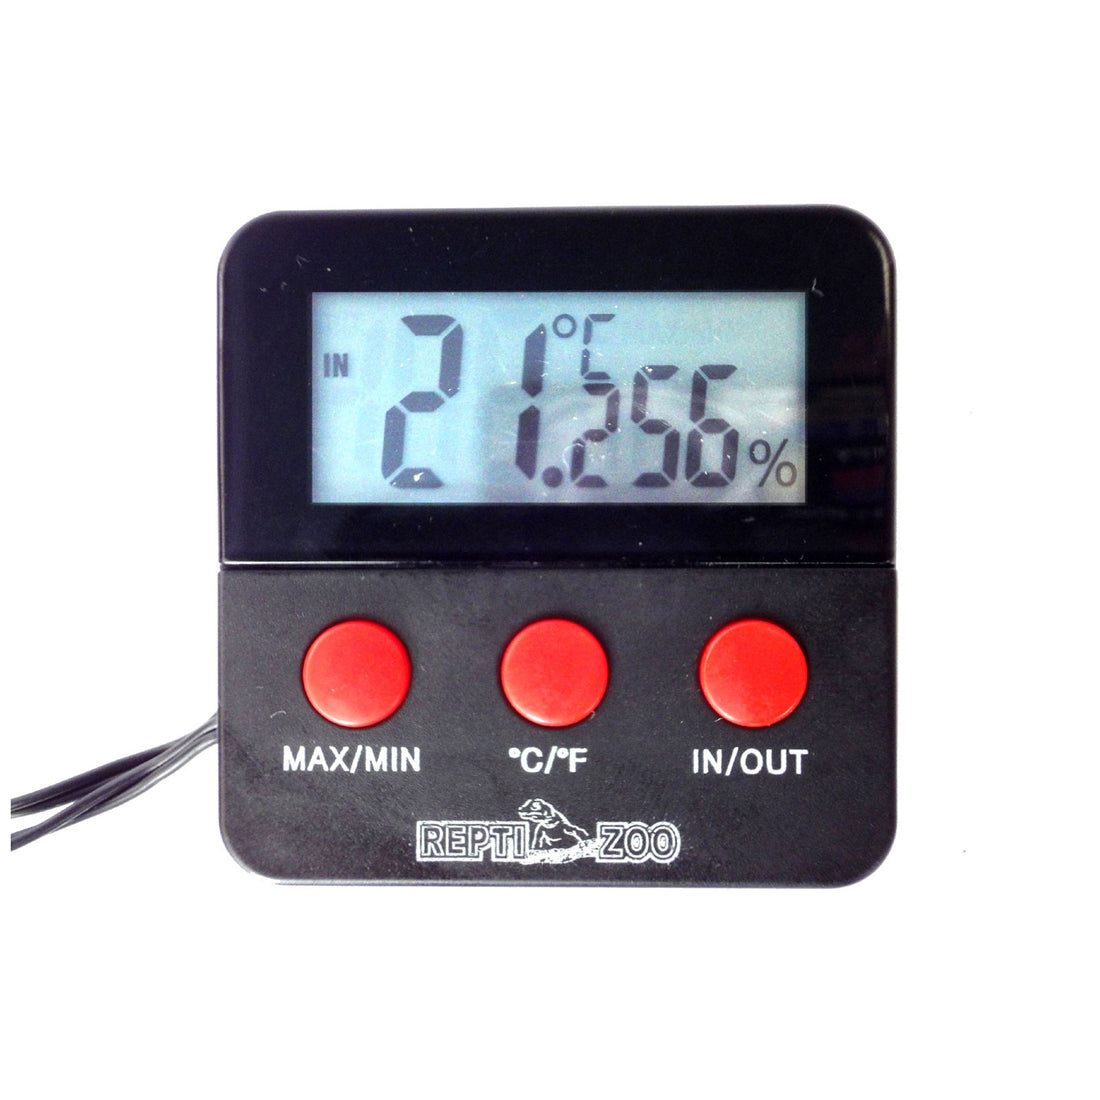 Digital Thermometer + Hygrometer Combined with Remote Probes